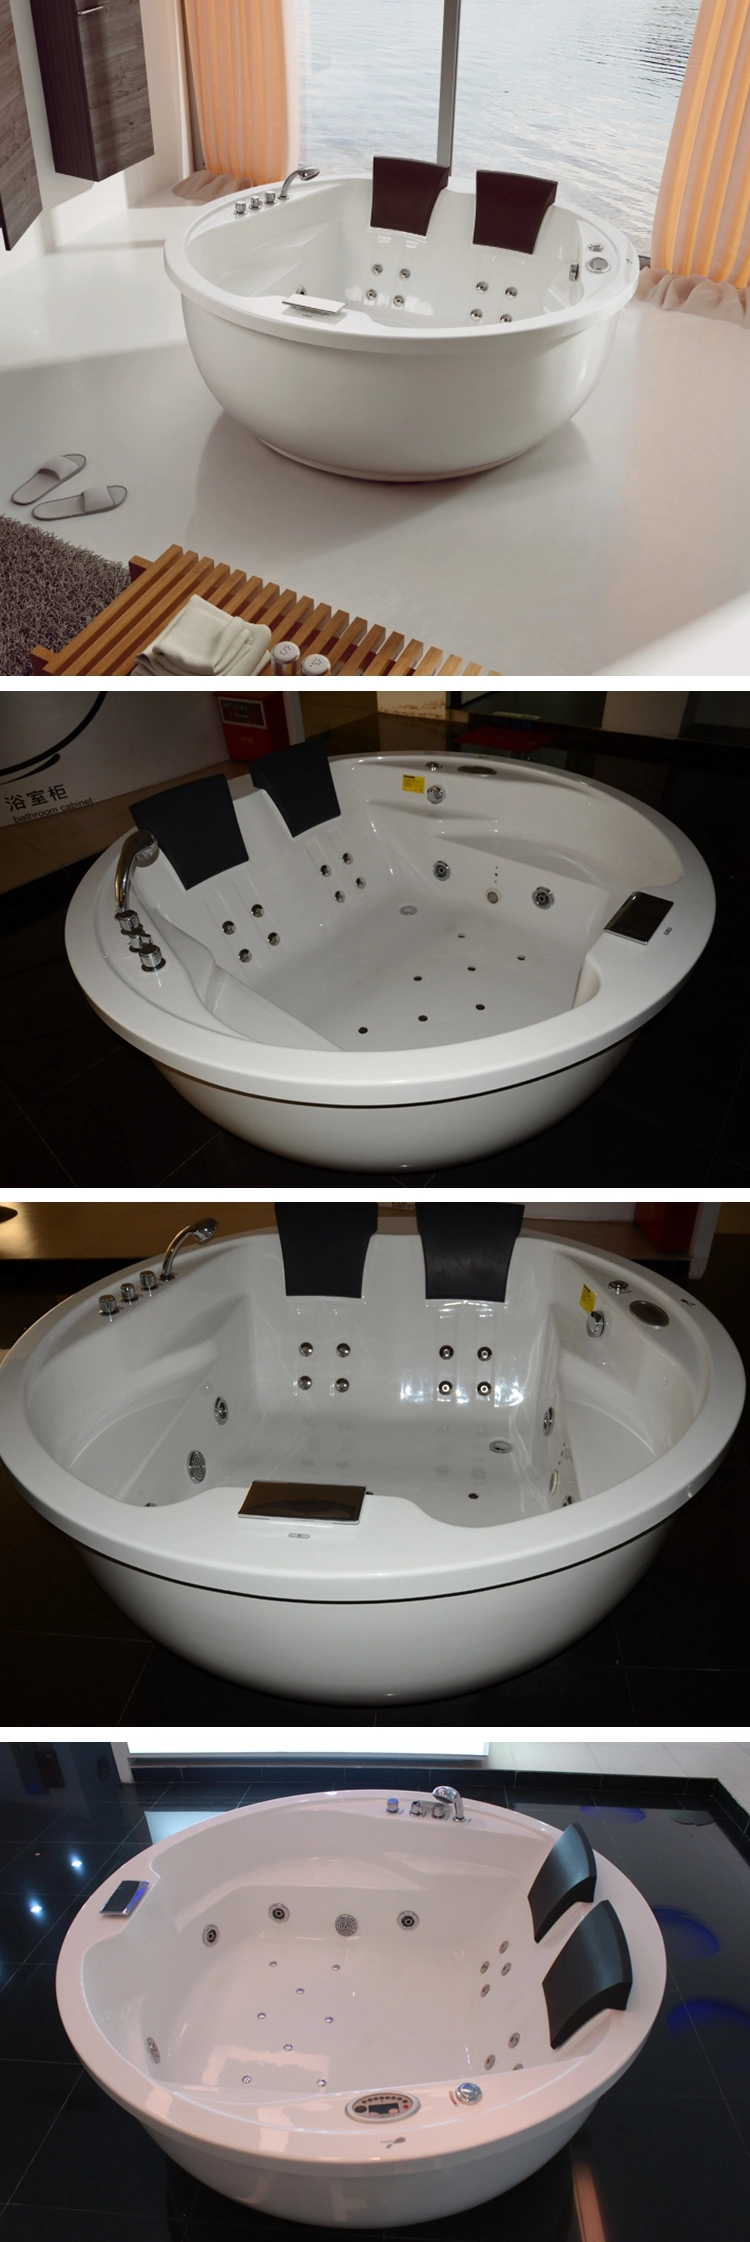 2 Person Dimensions in mm Jetted Free Standing Bathtub Acrylic